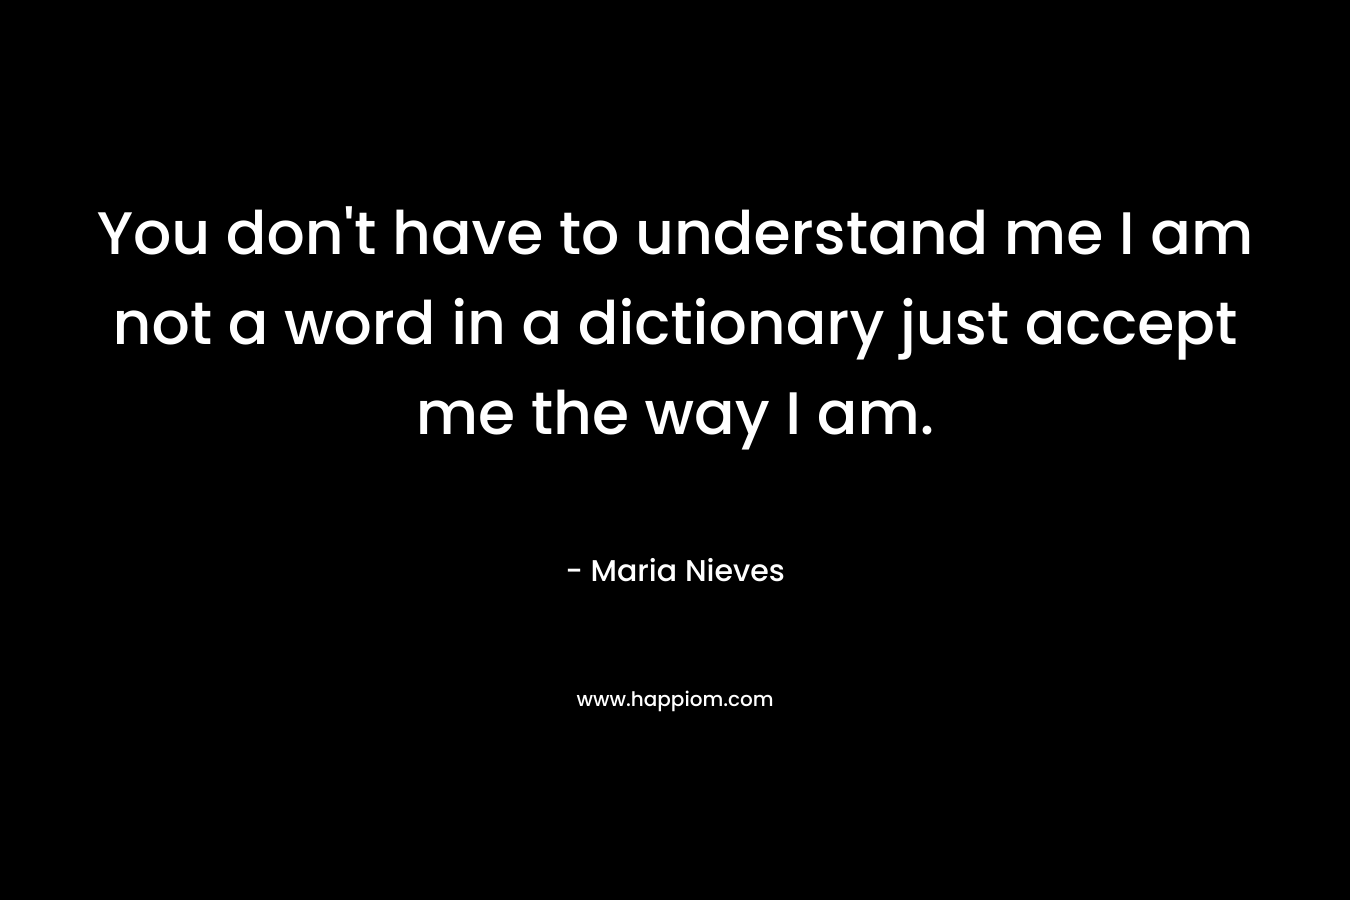 You don’t have to understand me I am not a word in a dictionary just accept me the way I am. – Maria Nieves